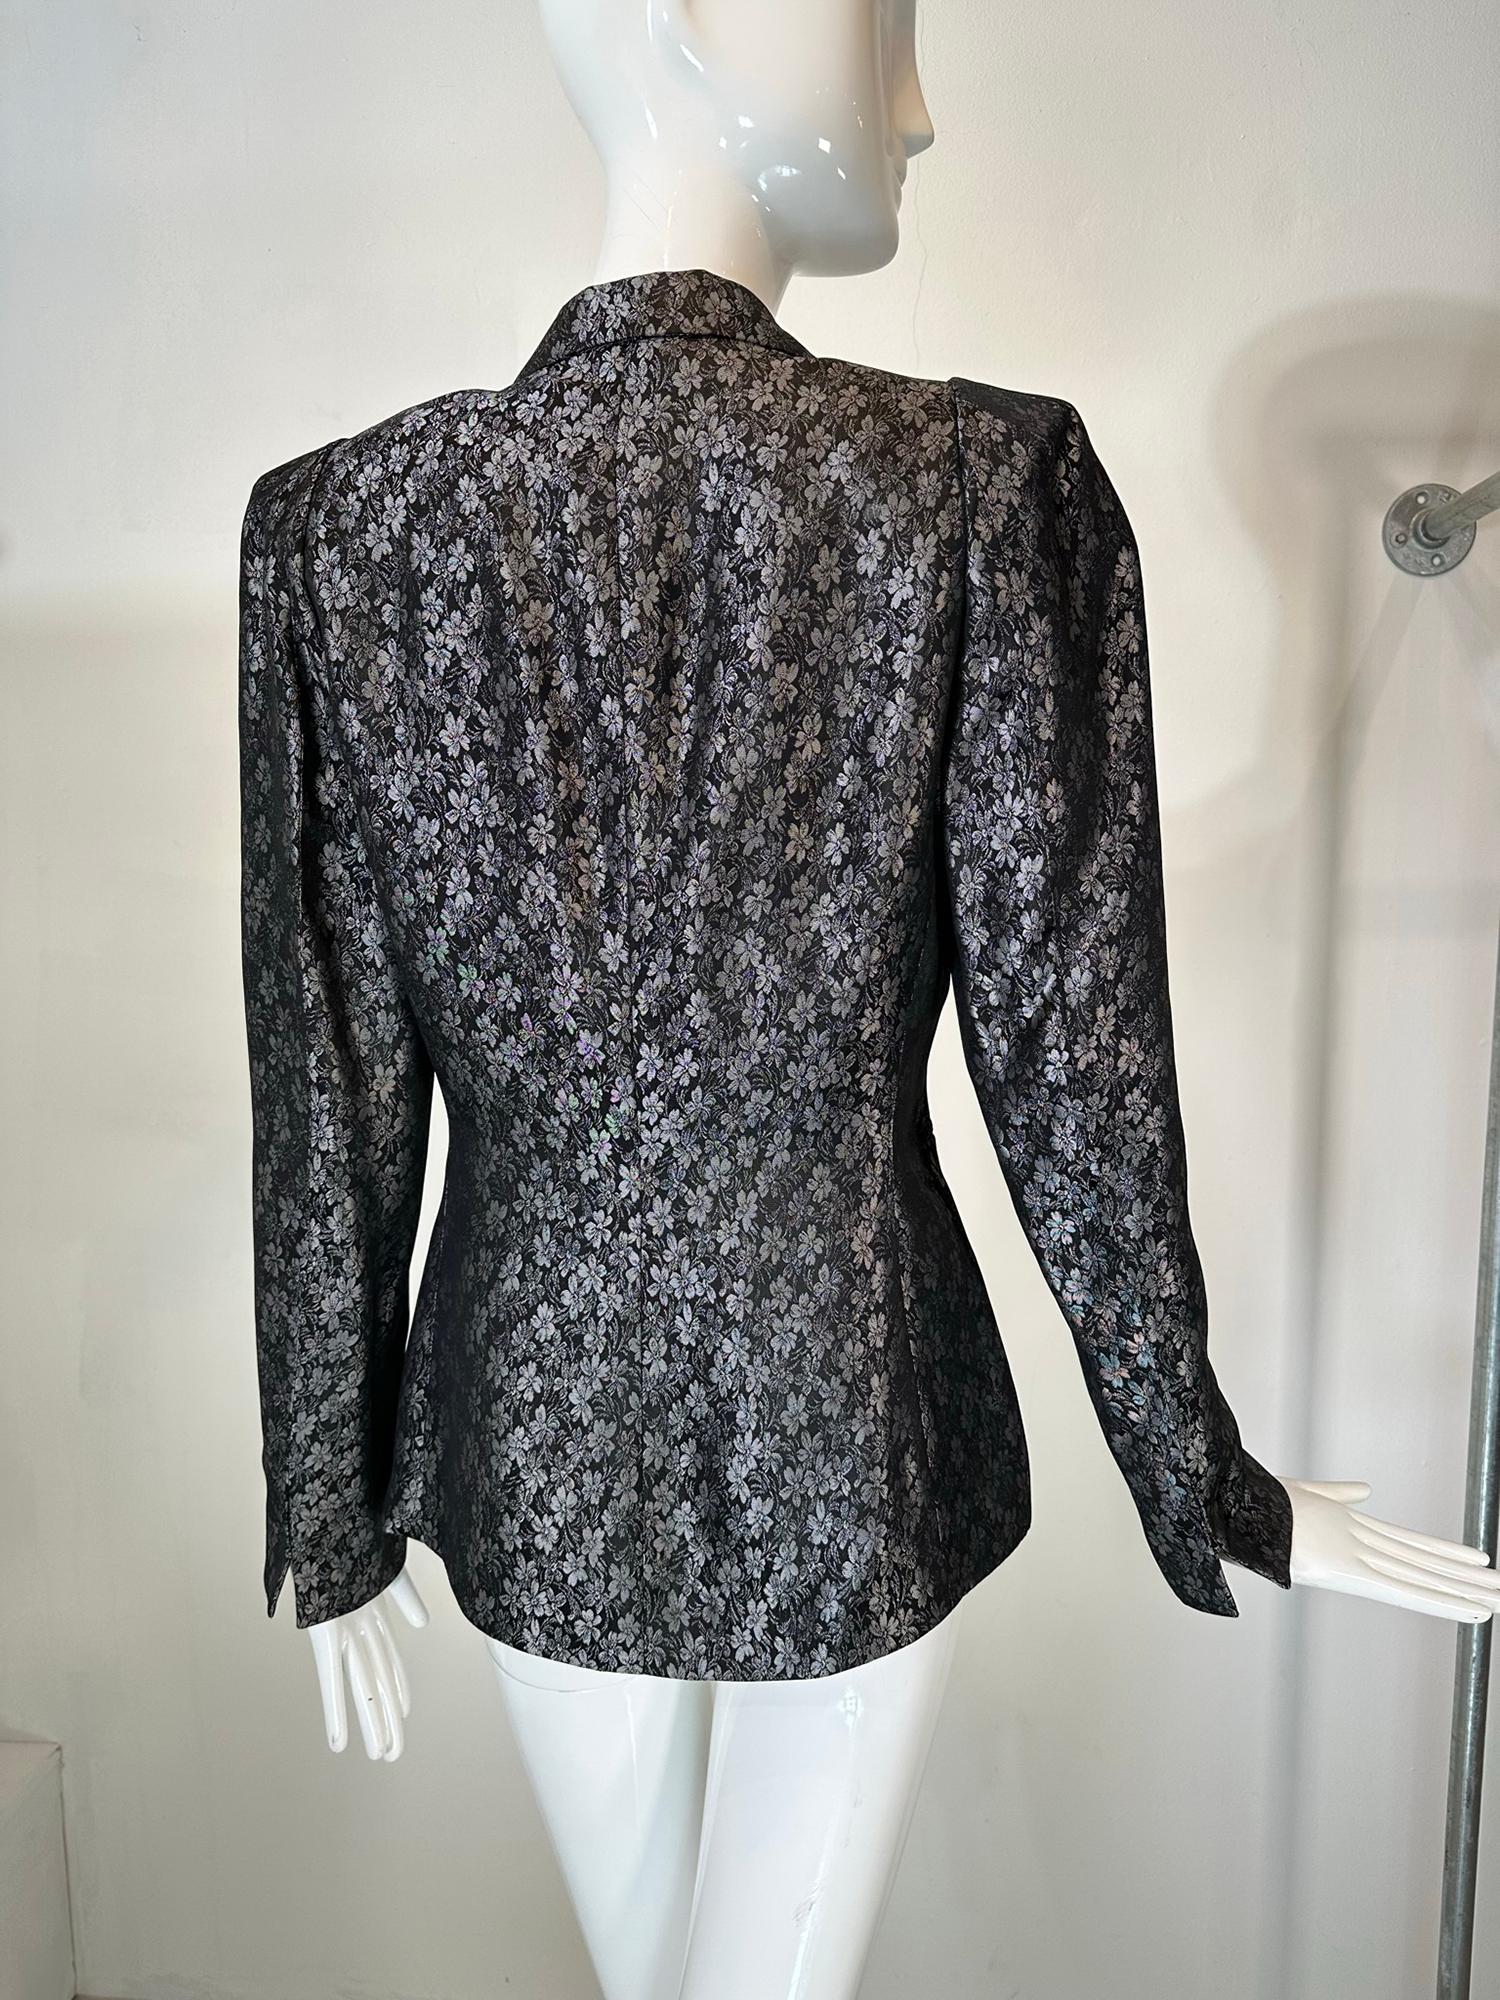 Richard Tyler Black & Silver Brocade Tailored Single Breasted Jacket 1990s For Sale 3